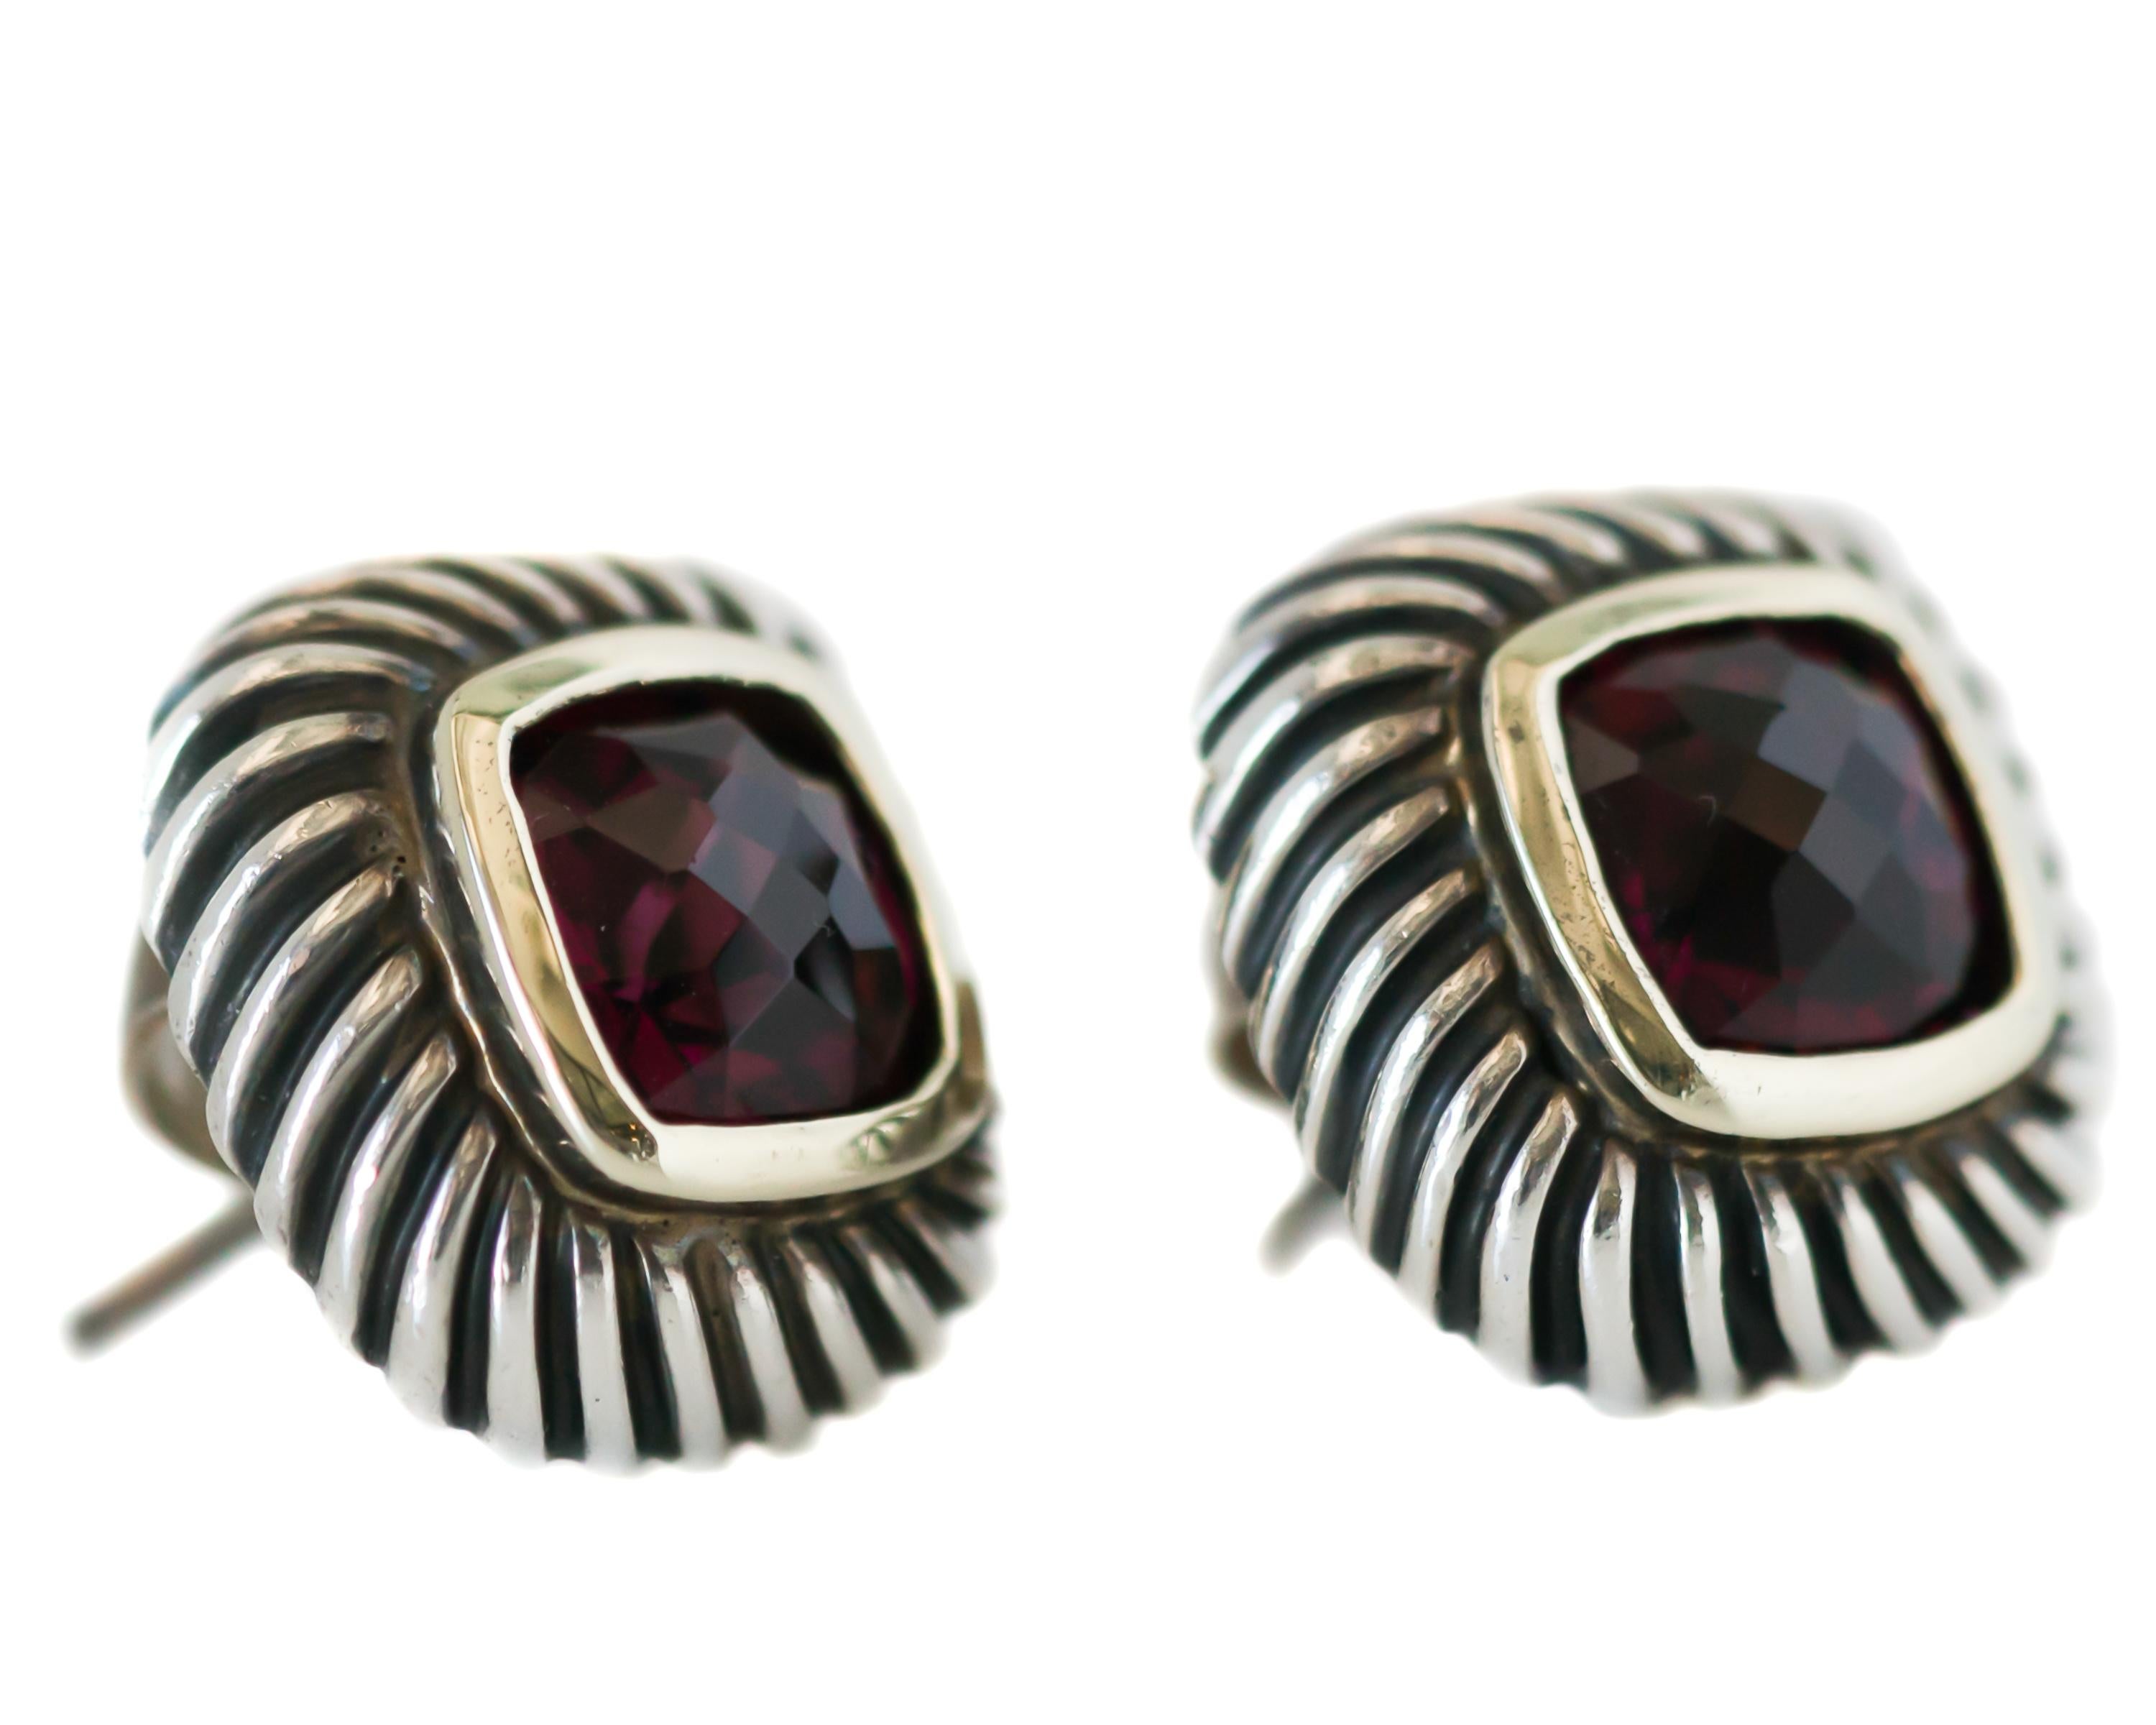 1990s David Yurman Cable Stud Earrings - 14 Karat Yellow Gold, Sterling Silver, Garnet

Features:
Cushion cut faceted Garnet center stone
14 Karat Yellow Gold Bezel setting and Post
Sterling Silver Cable Frame and earring back
Earrings measure 14